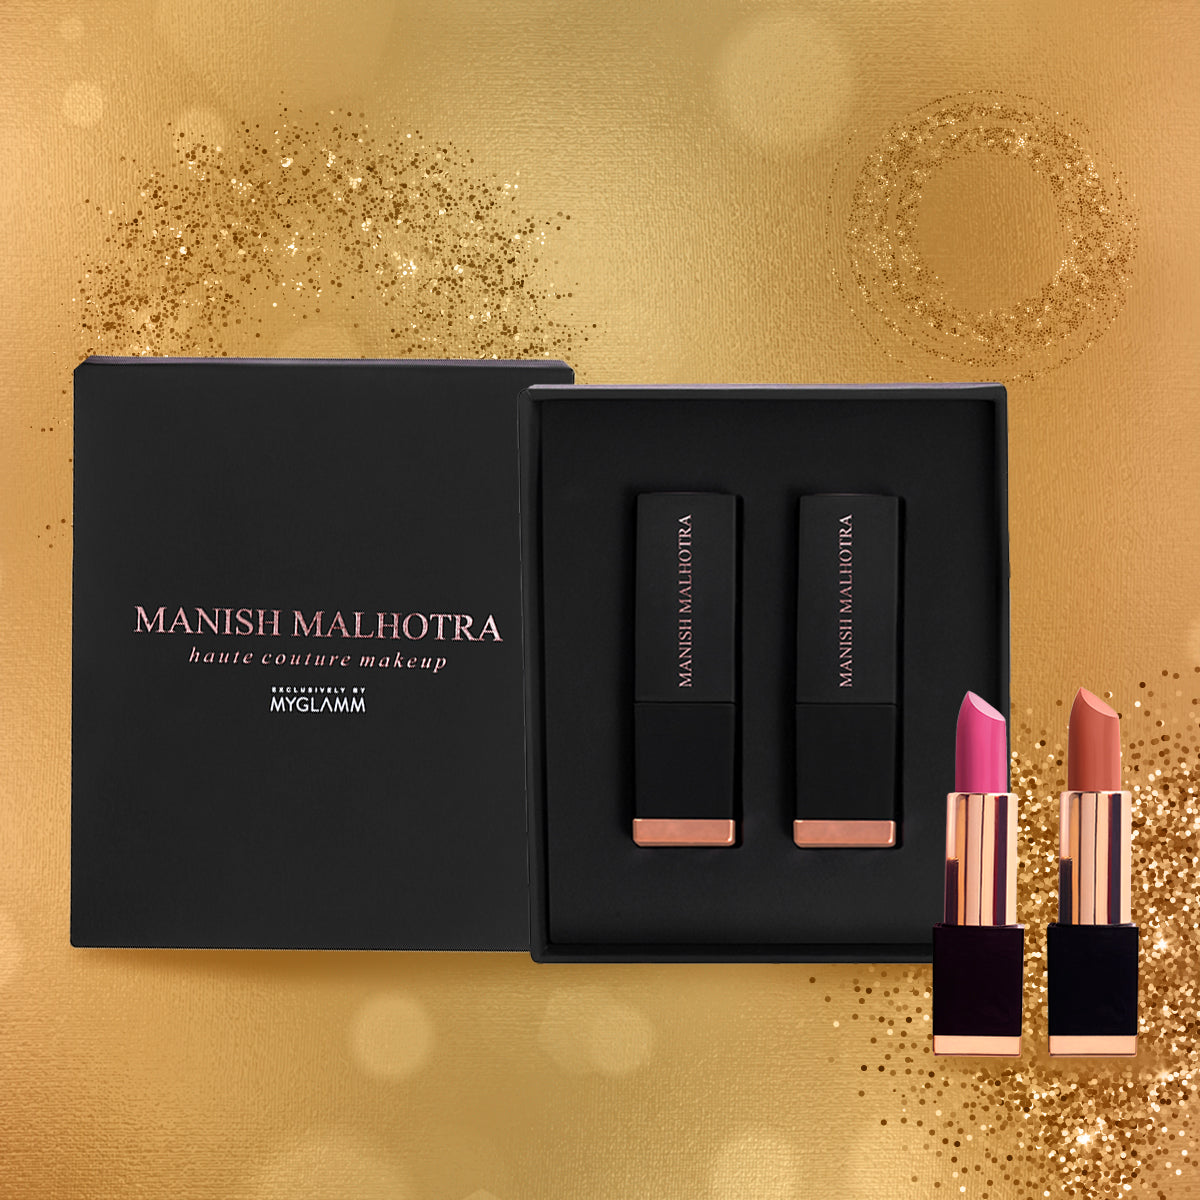 Manish Malhotra Beauty By MyGlamm Vivid Obsessions Lipstick Duo-Pack of 2